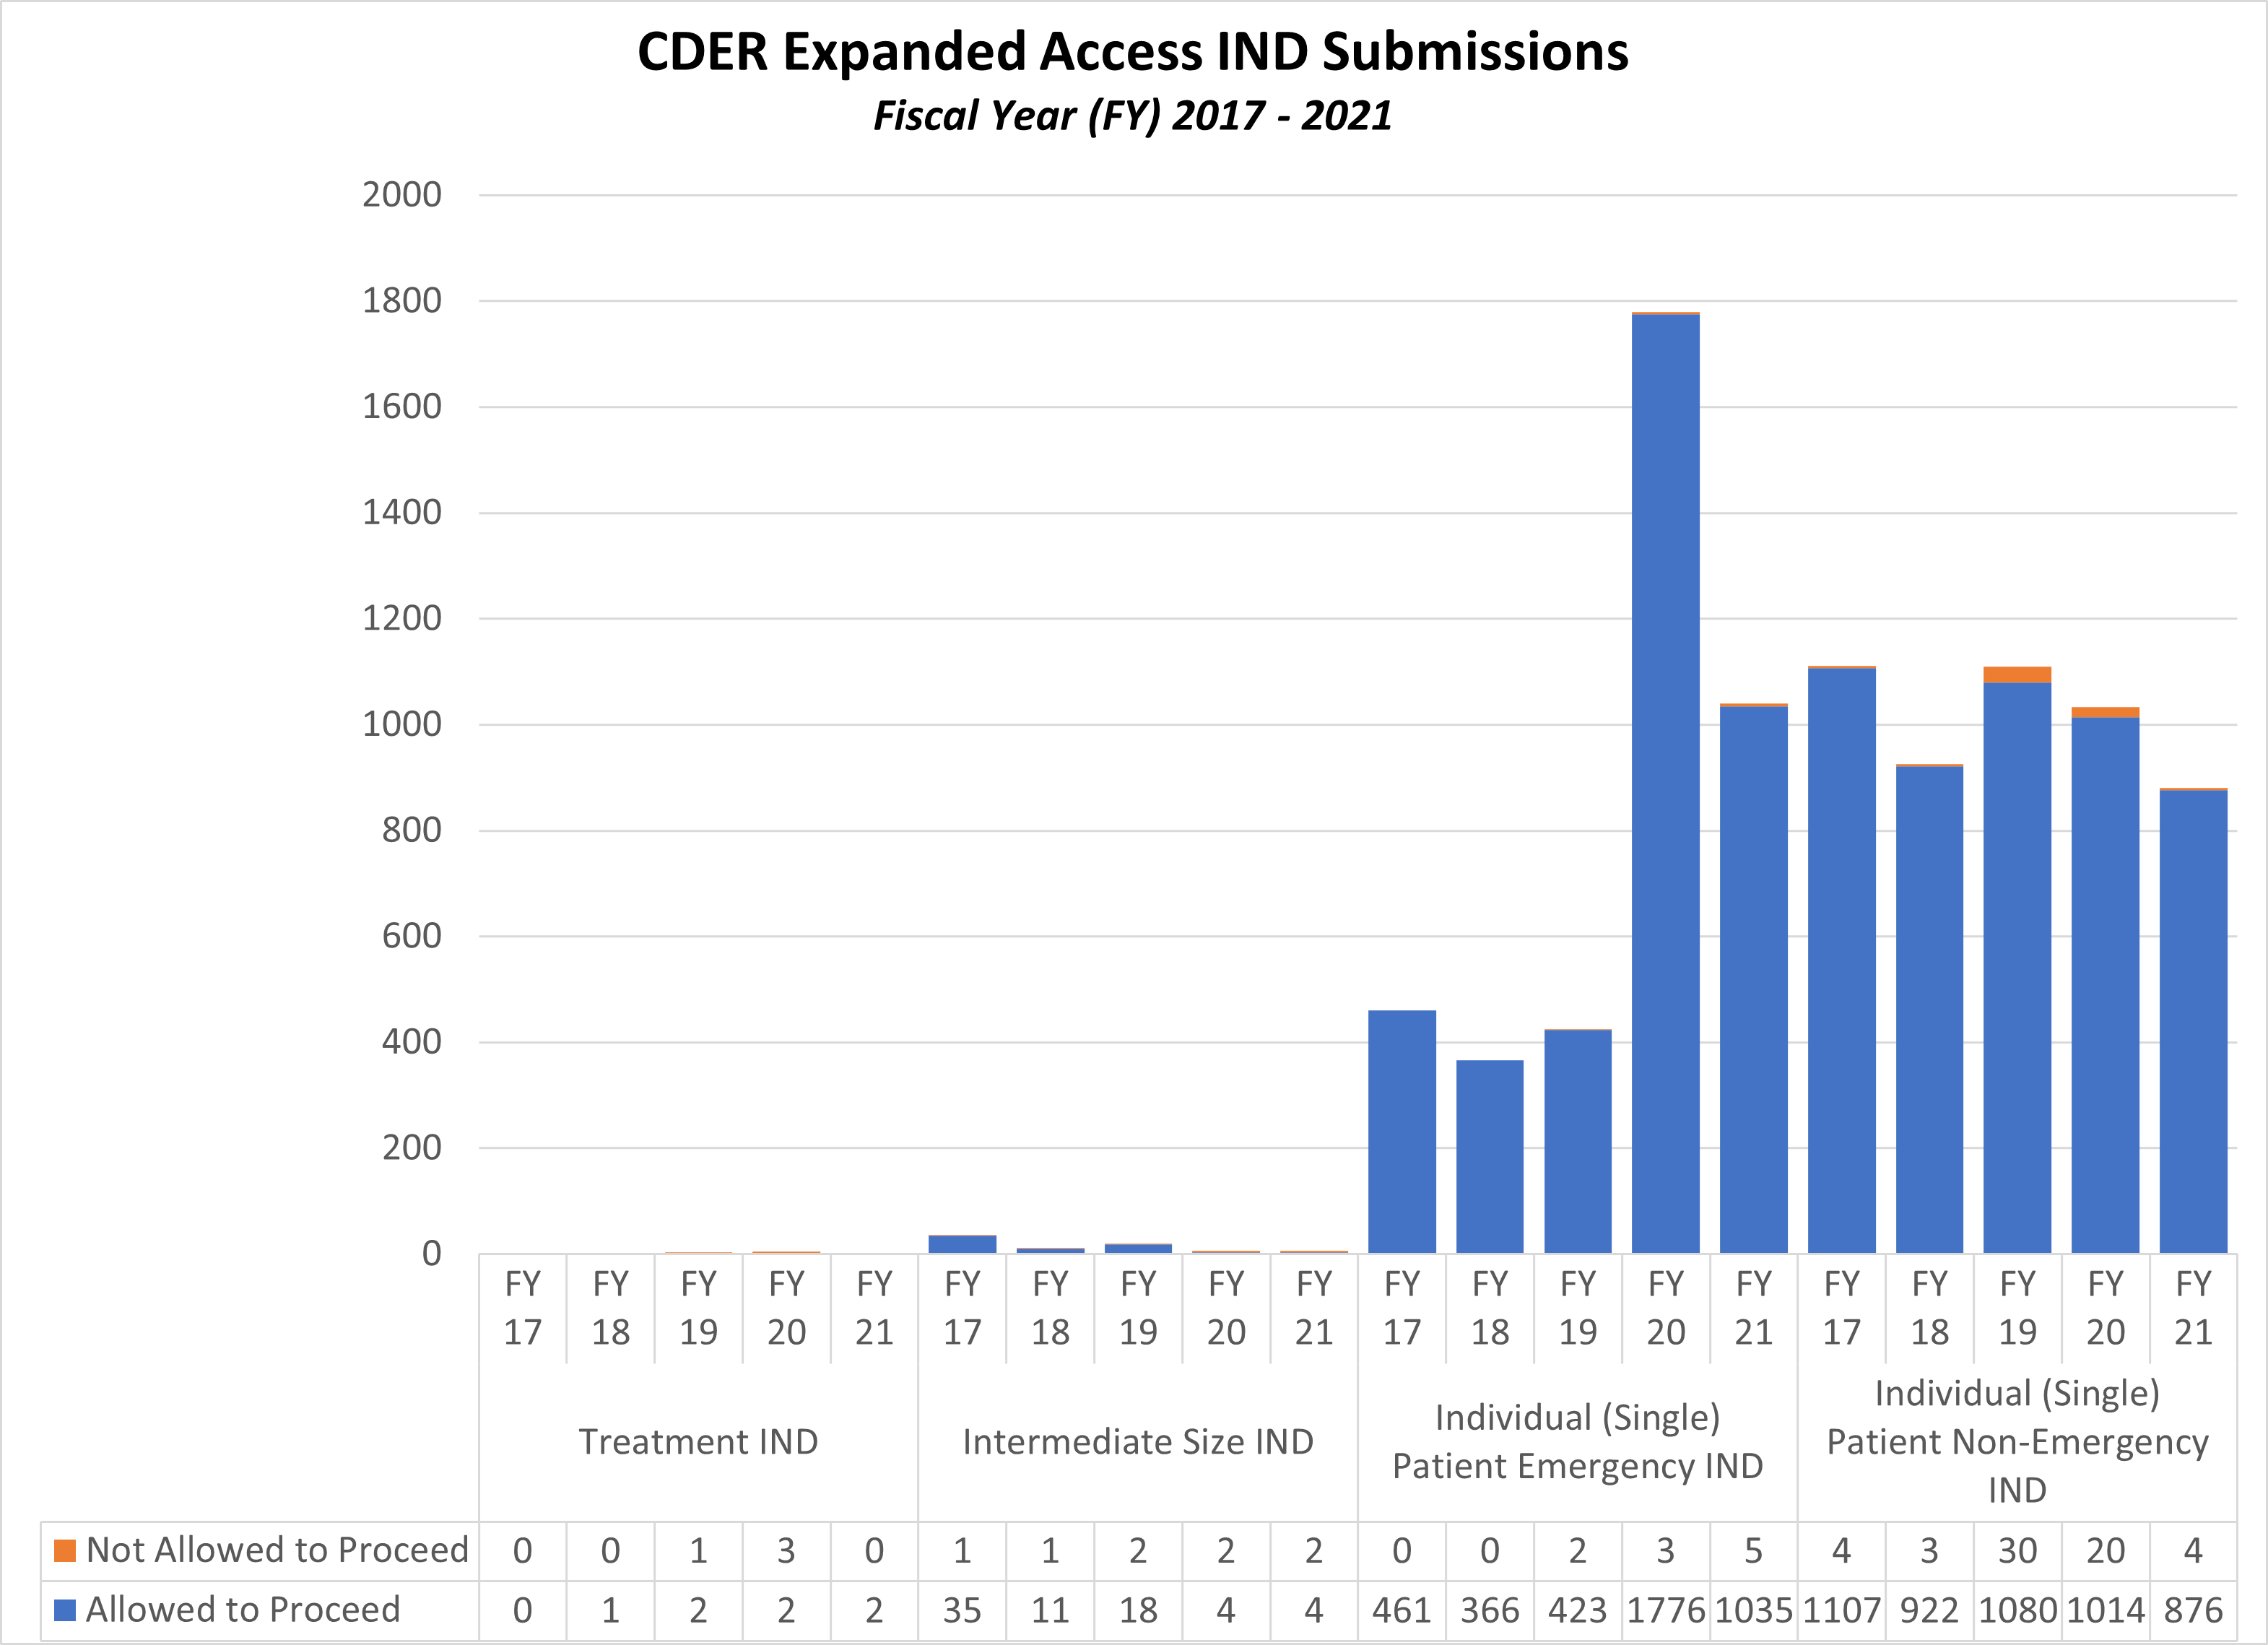 CDER Expanded Access IND Submissions